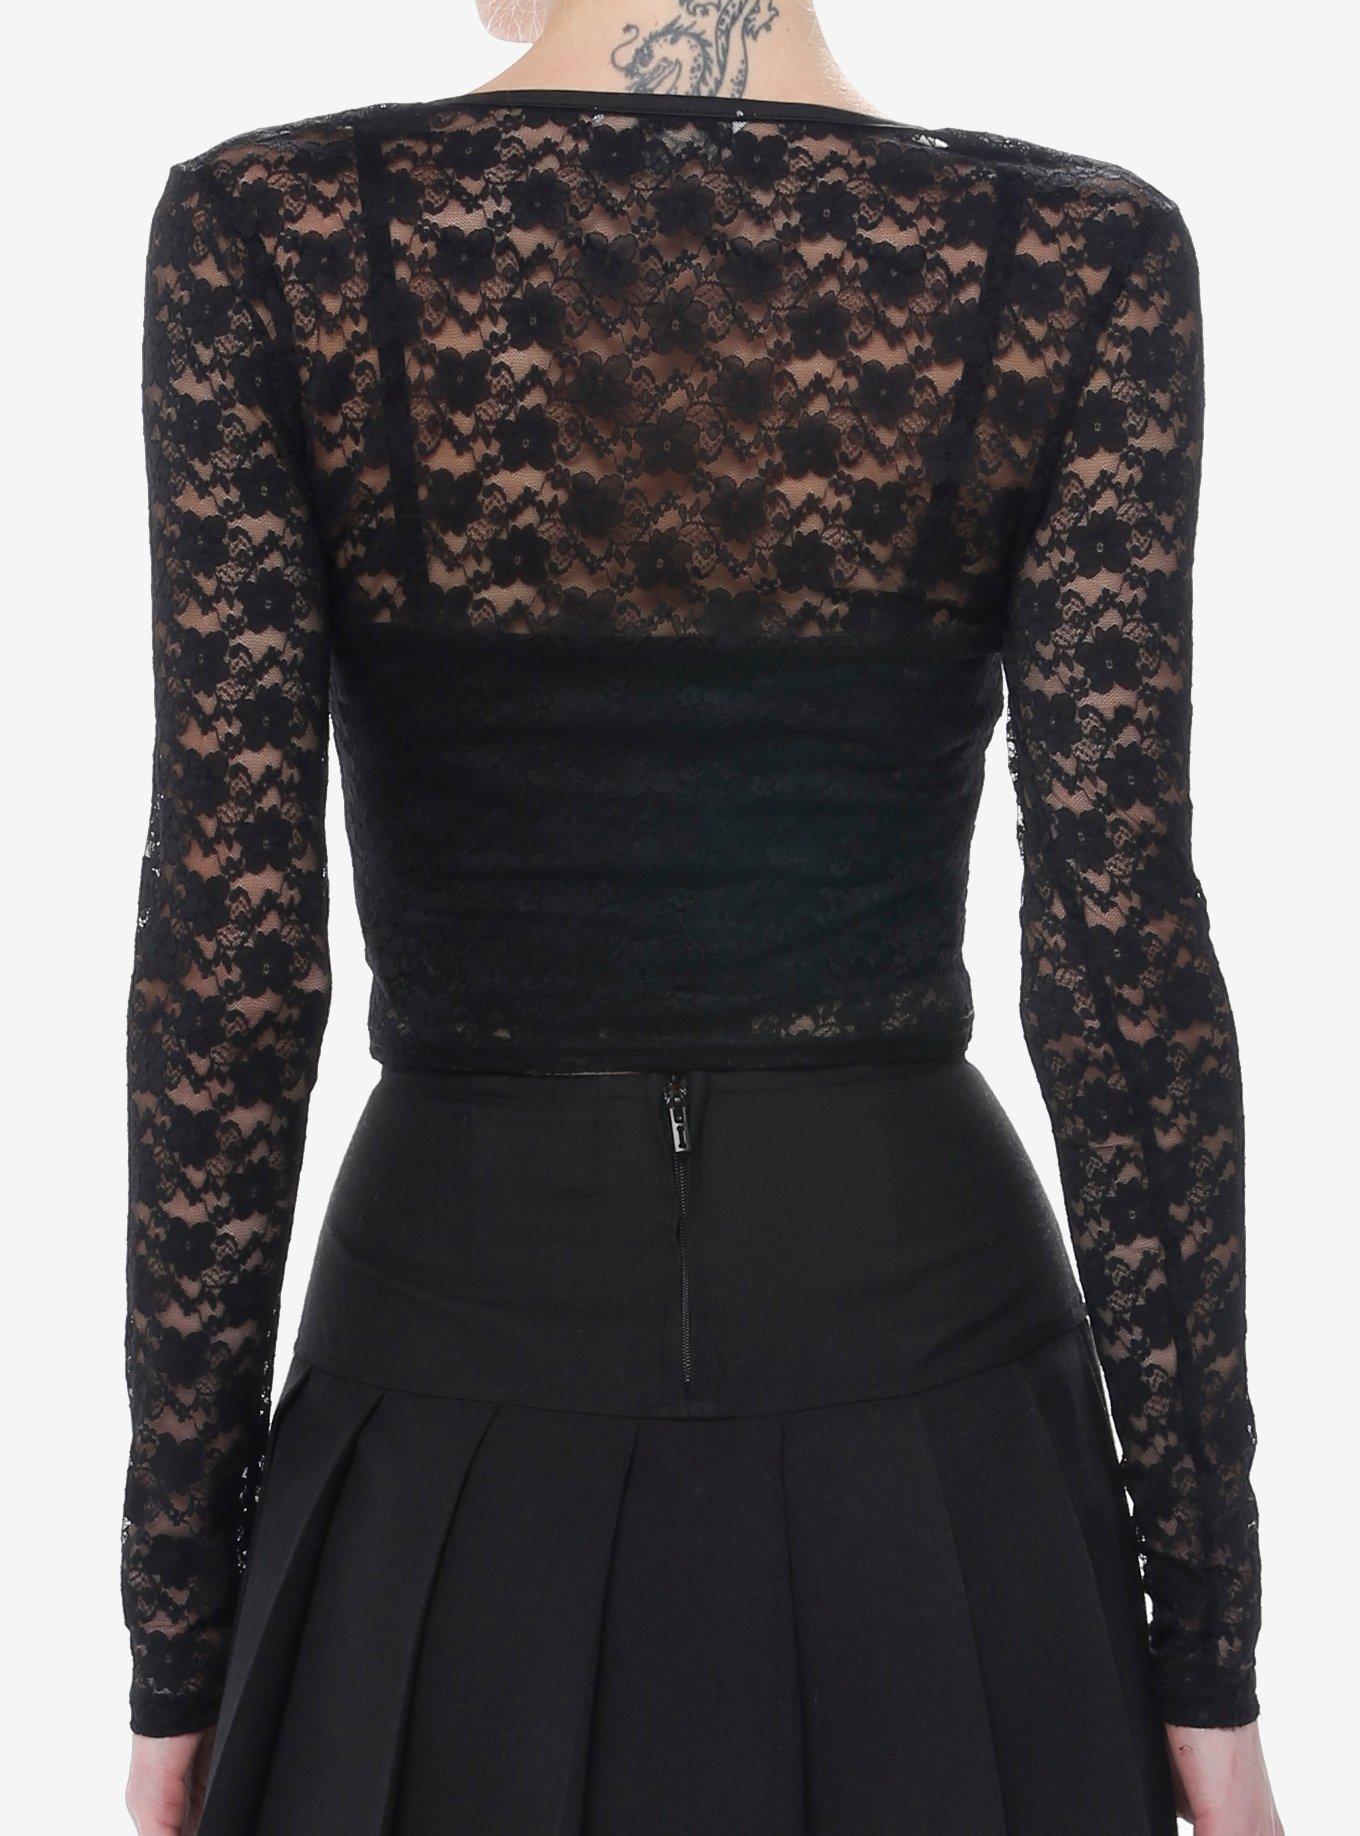 Black Lace Button-Front Girls Long-Sleeve Top, BLACK, alternate